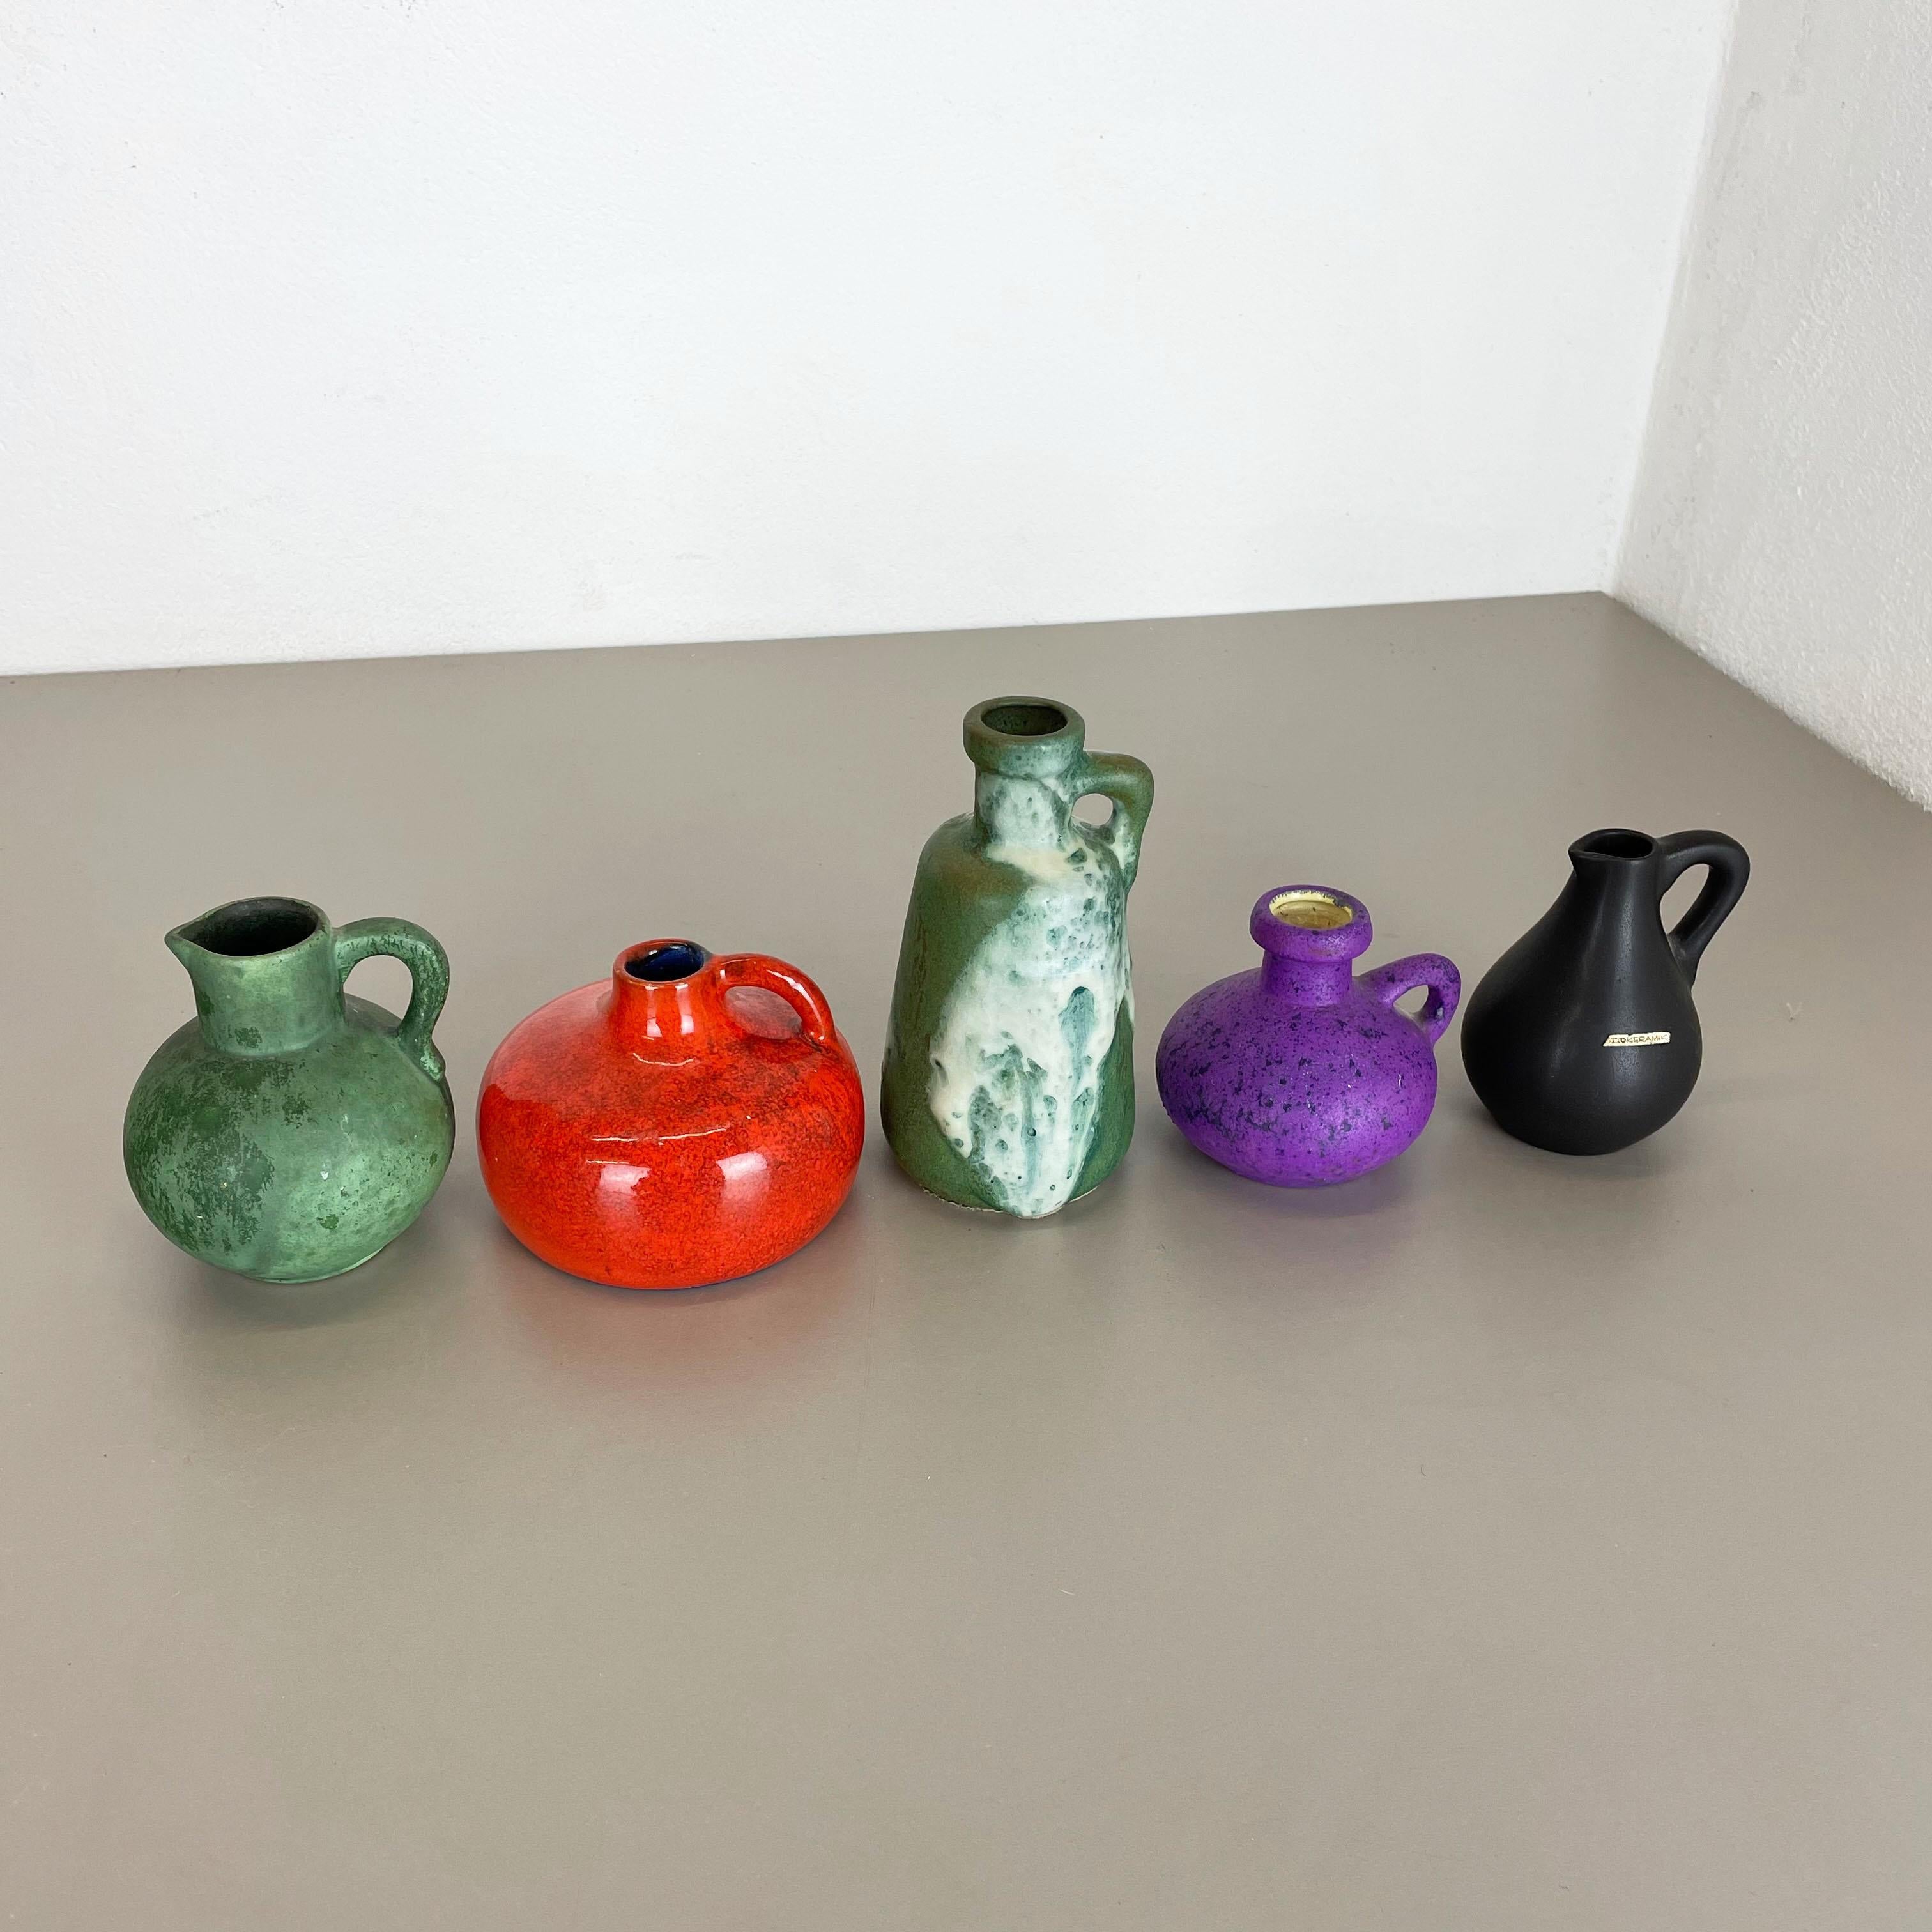 Article:

Ceramic objects set of 5


Designer and producer:

Otto Keramik, Germany



Decade:

1970s


This original vintage Studio Pottery objects were designed and produced by Otto Keramik in the 1970s in Germany. It is made of